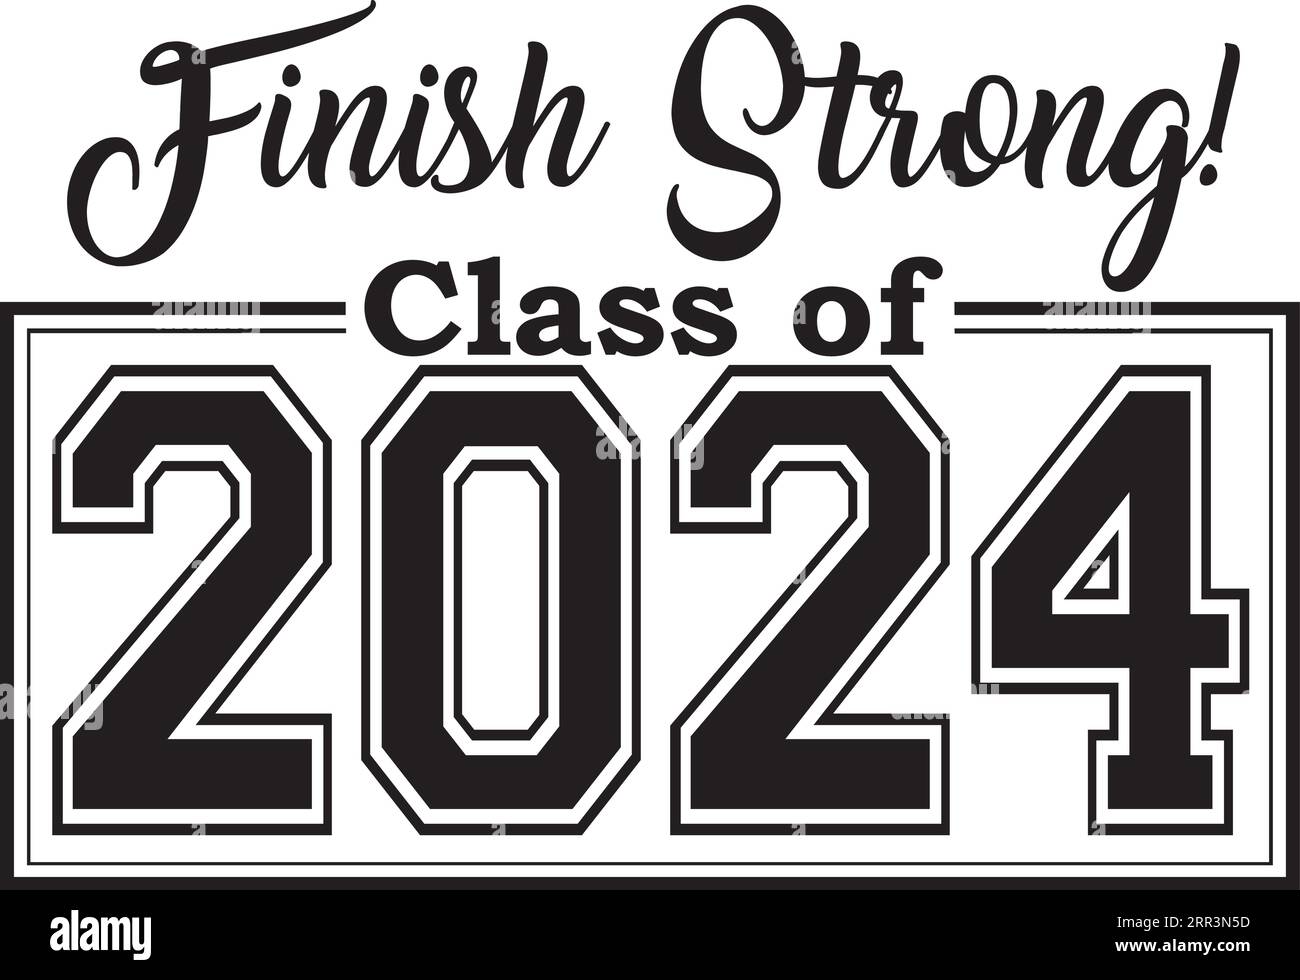 Class of 2024 finish strong Stock Vector Image & Art - Alamy